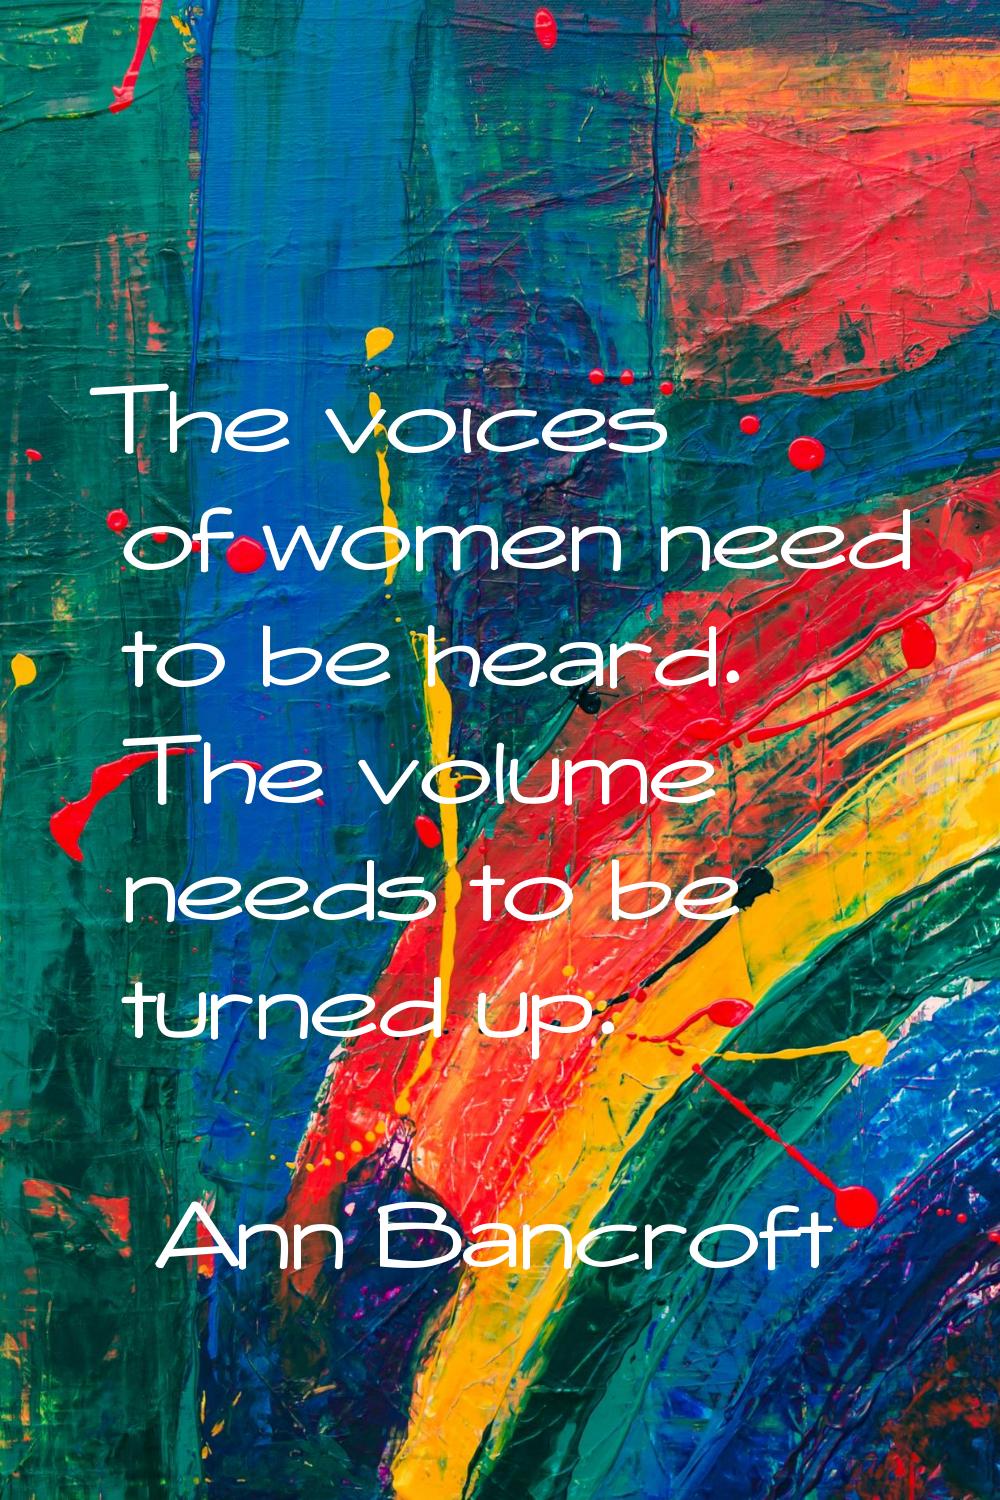 The voices of women need to be heard. The volume needs to be turned up.